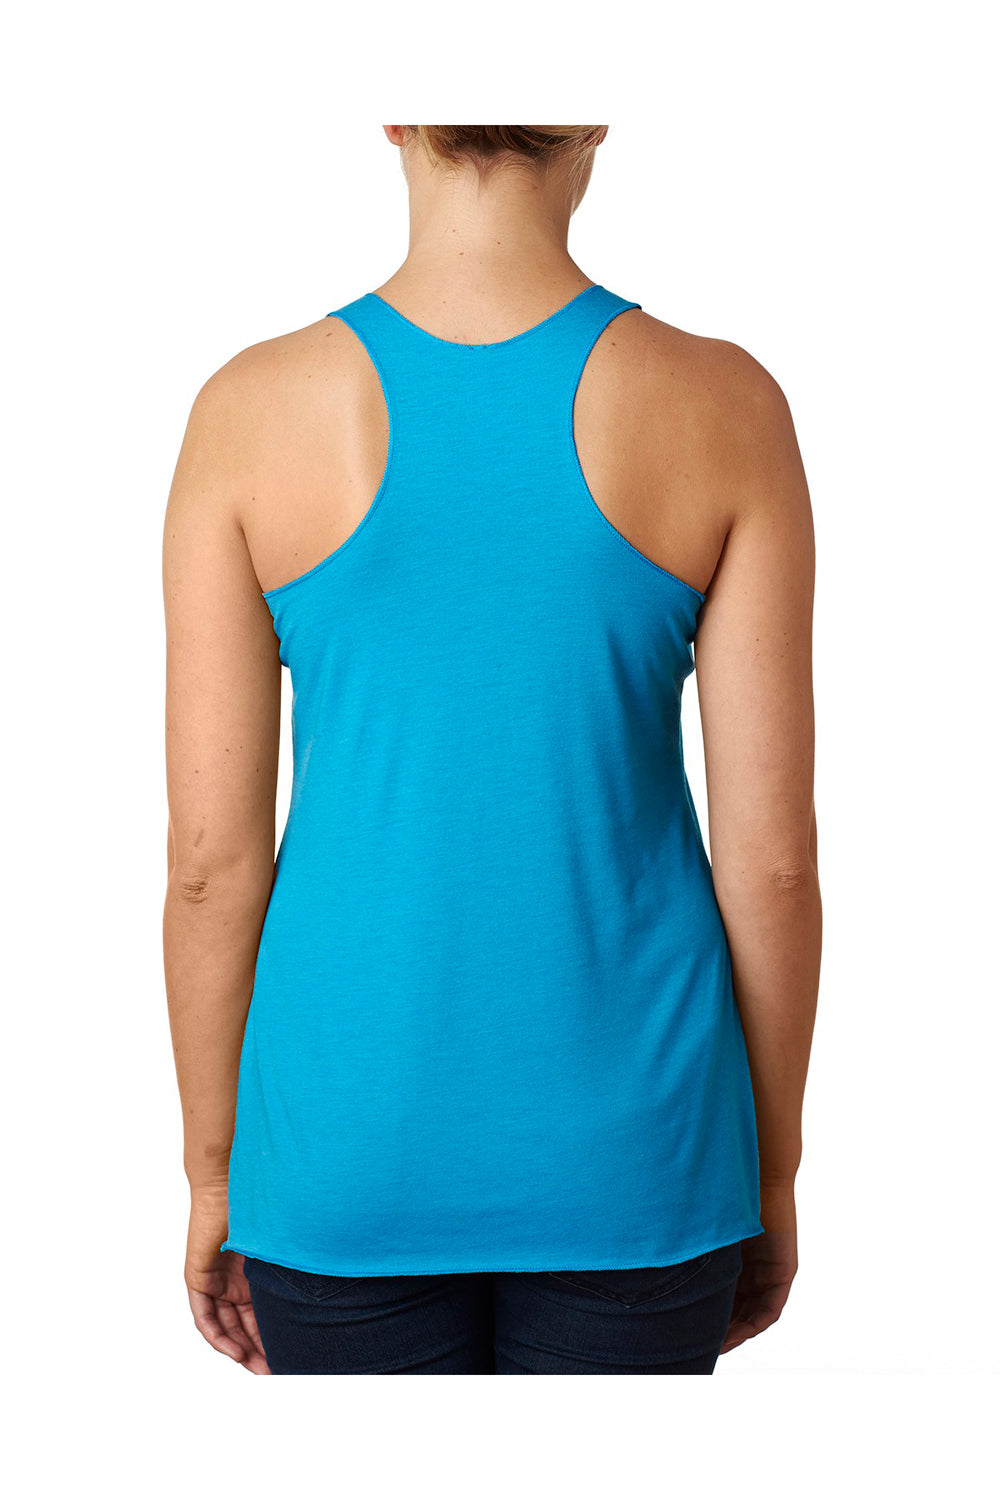 144 Pieces Sofra Ladies Racerback Tank Top In Turquoise - Womens